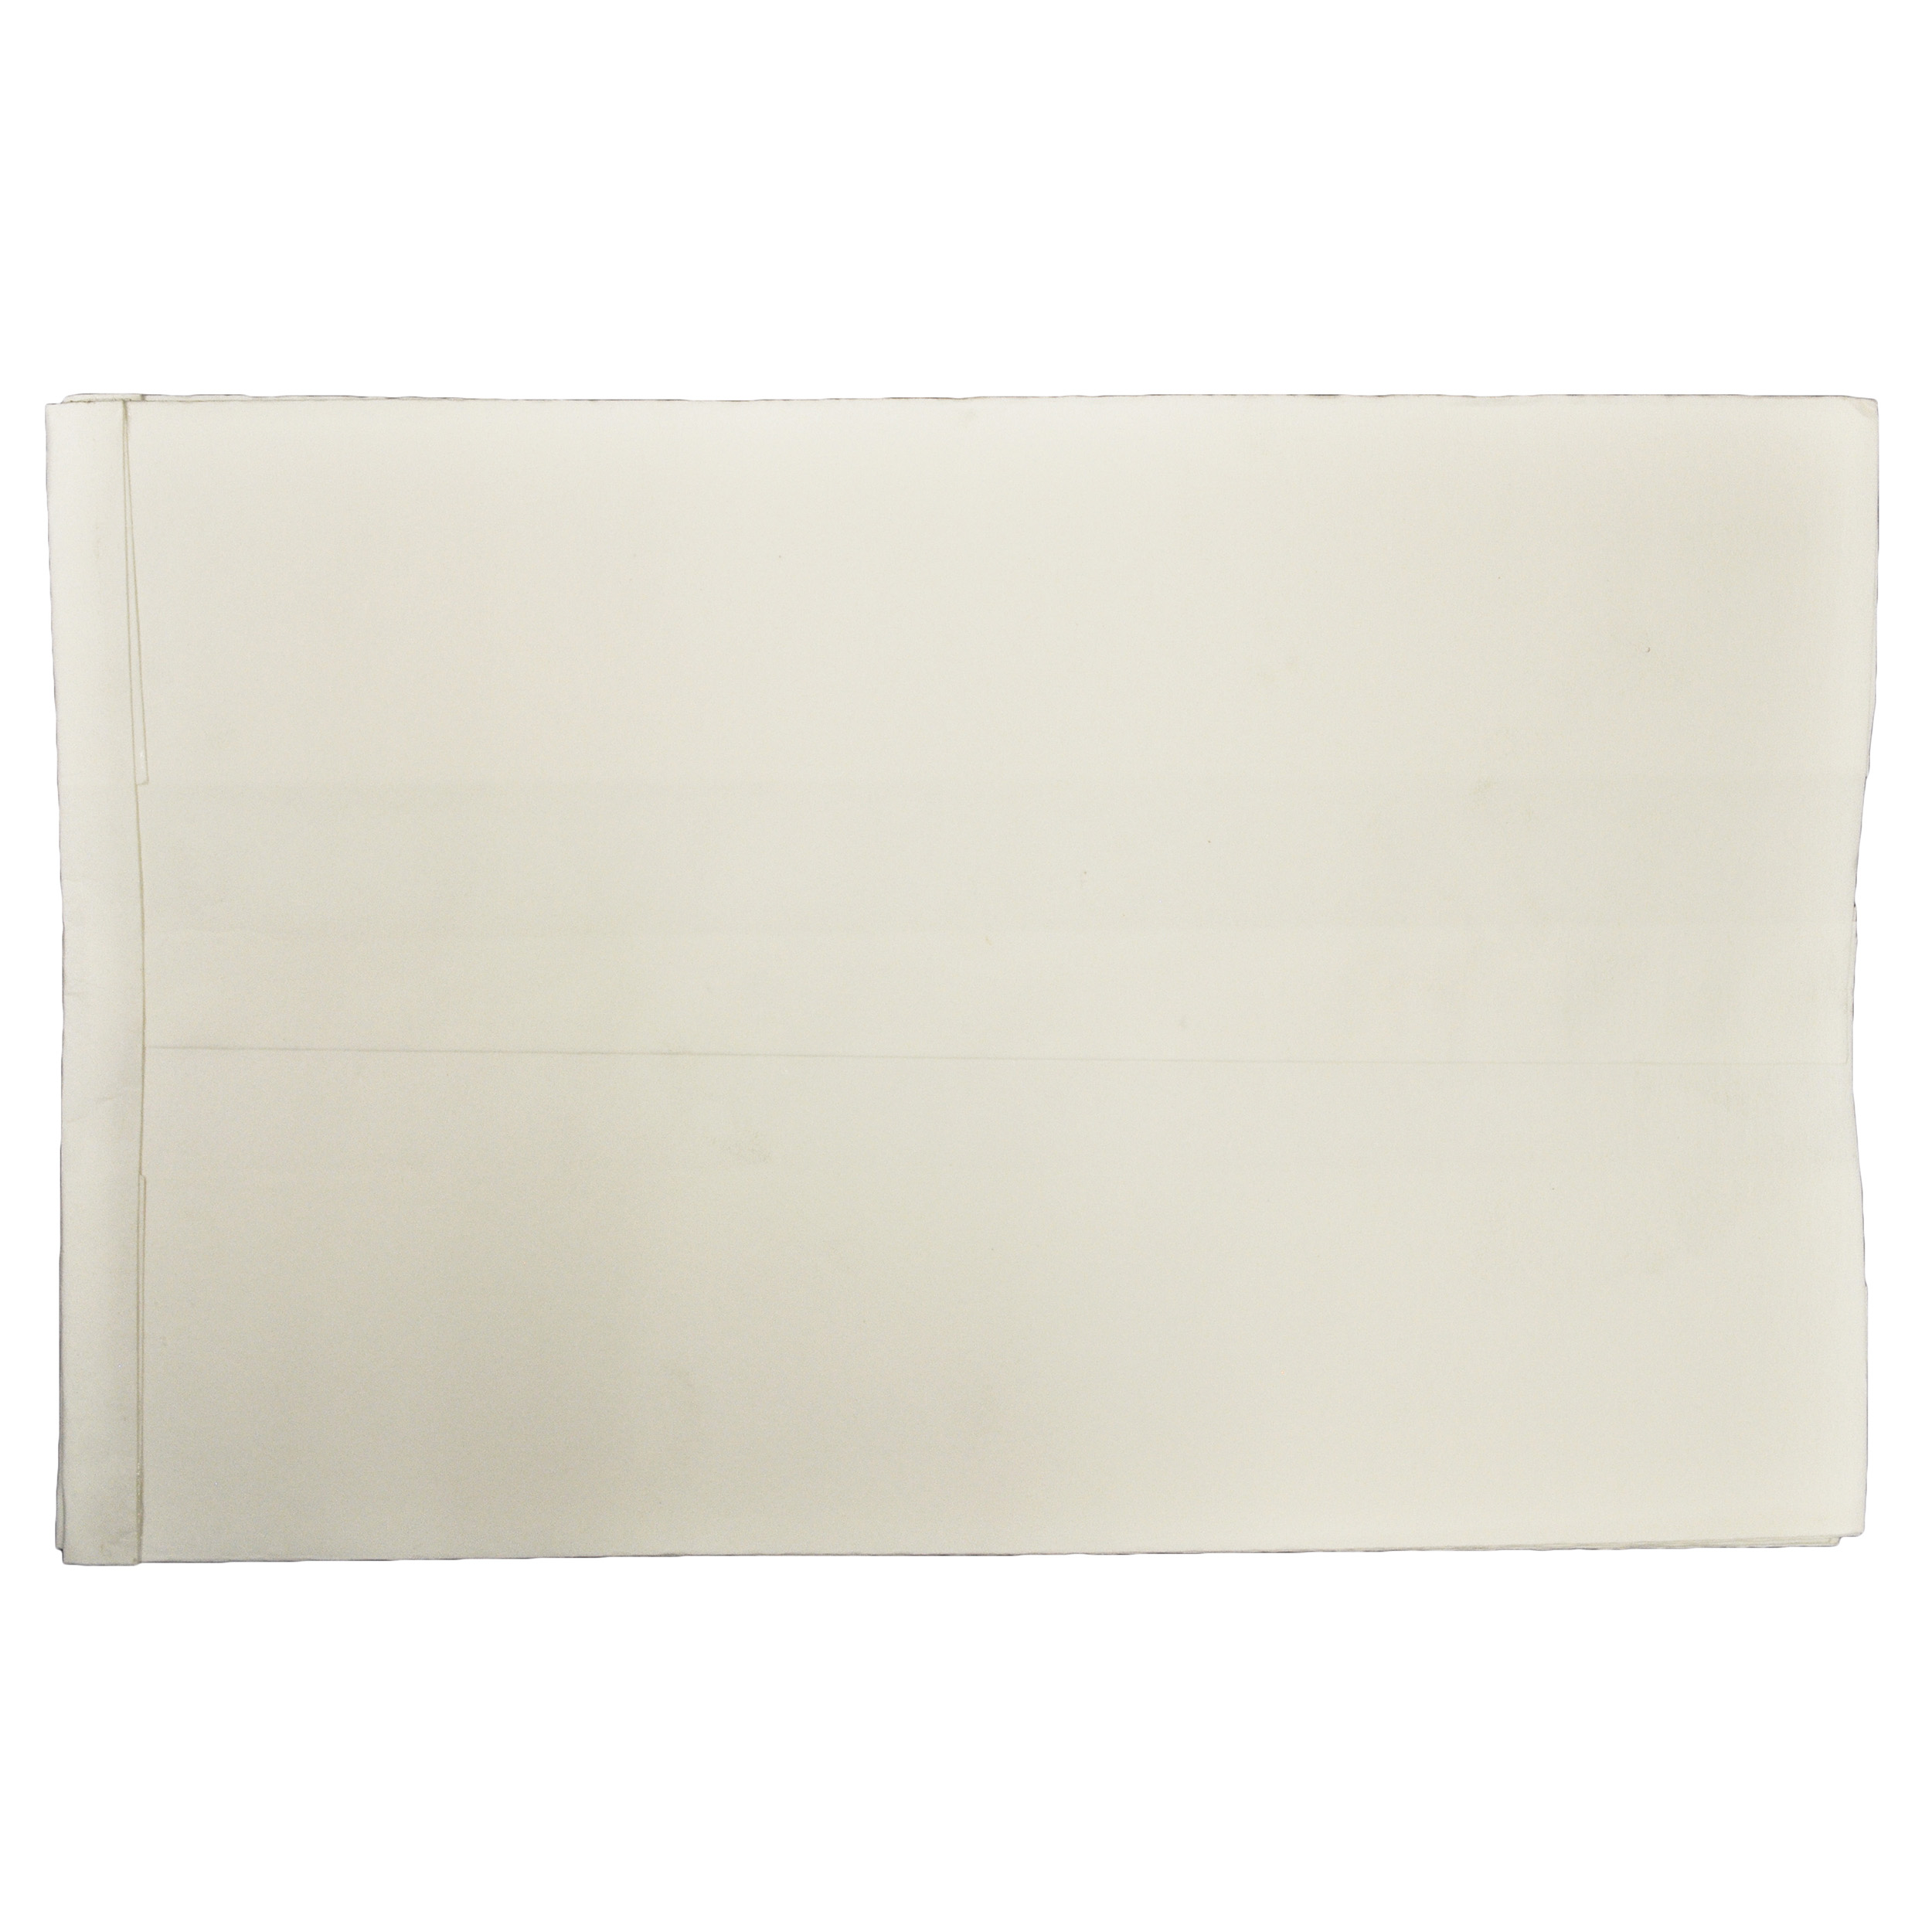 Filter Bags For Model 63-100 Dust Collector, Pack Of 5